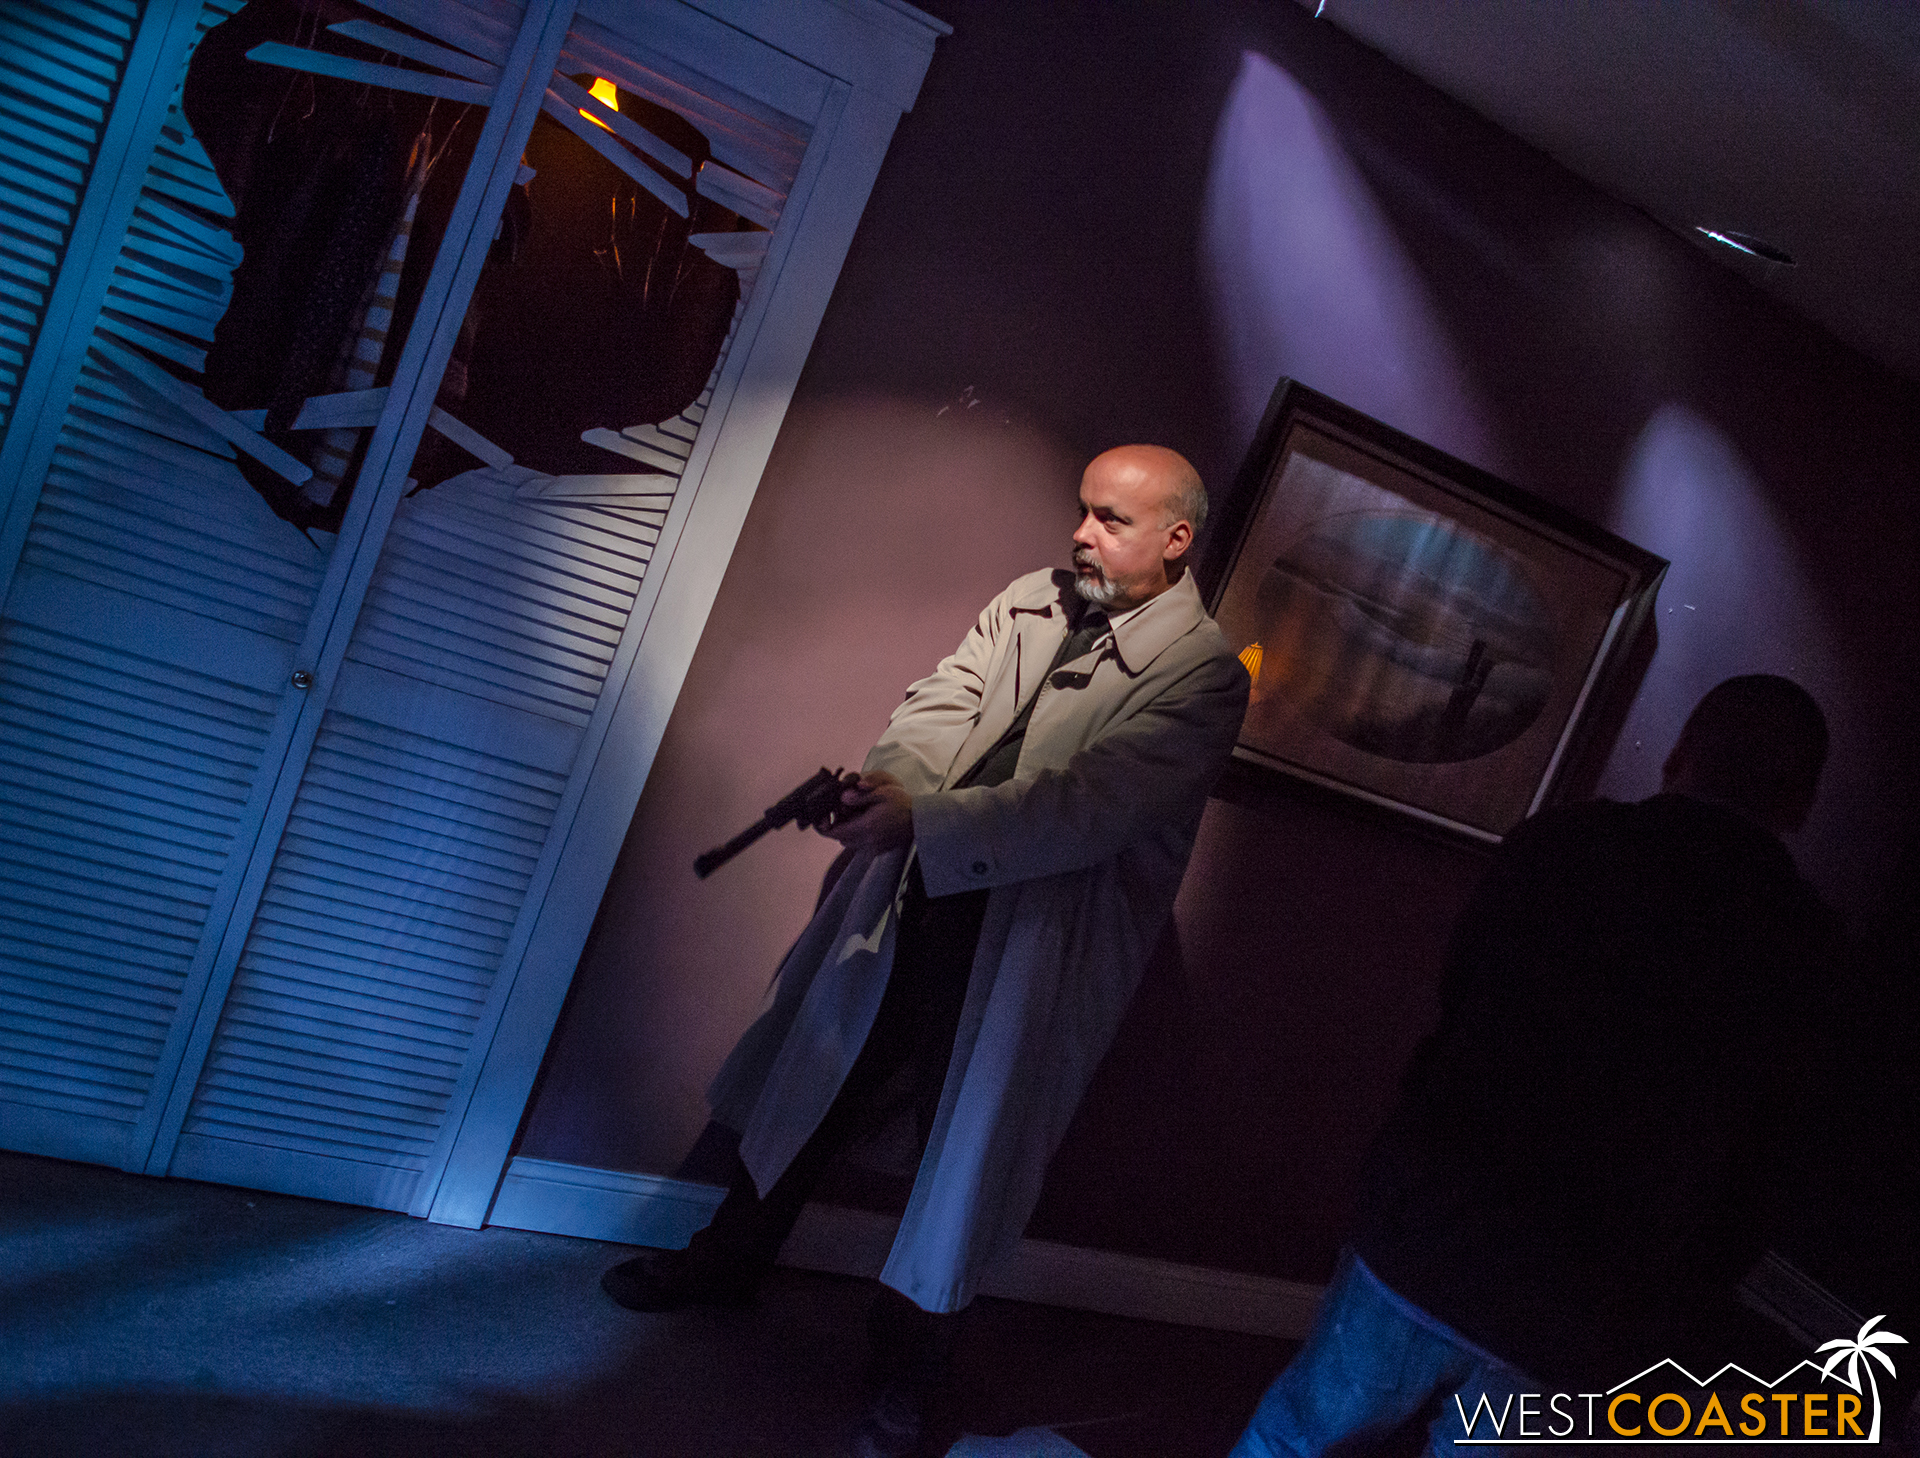  After going through the living room, we come upon Dr. Sam Loomis confronting Michael Myers. 